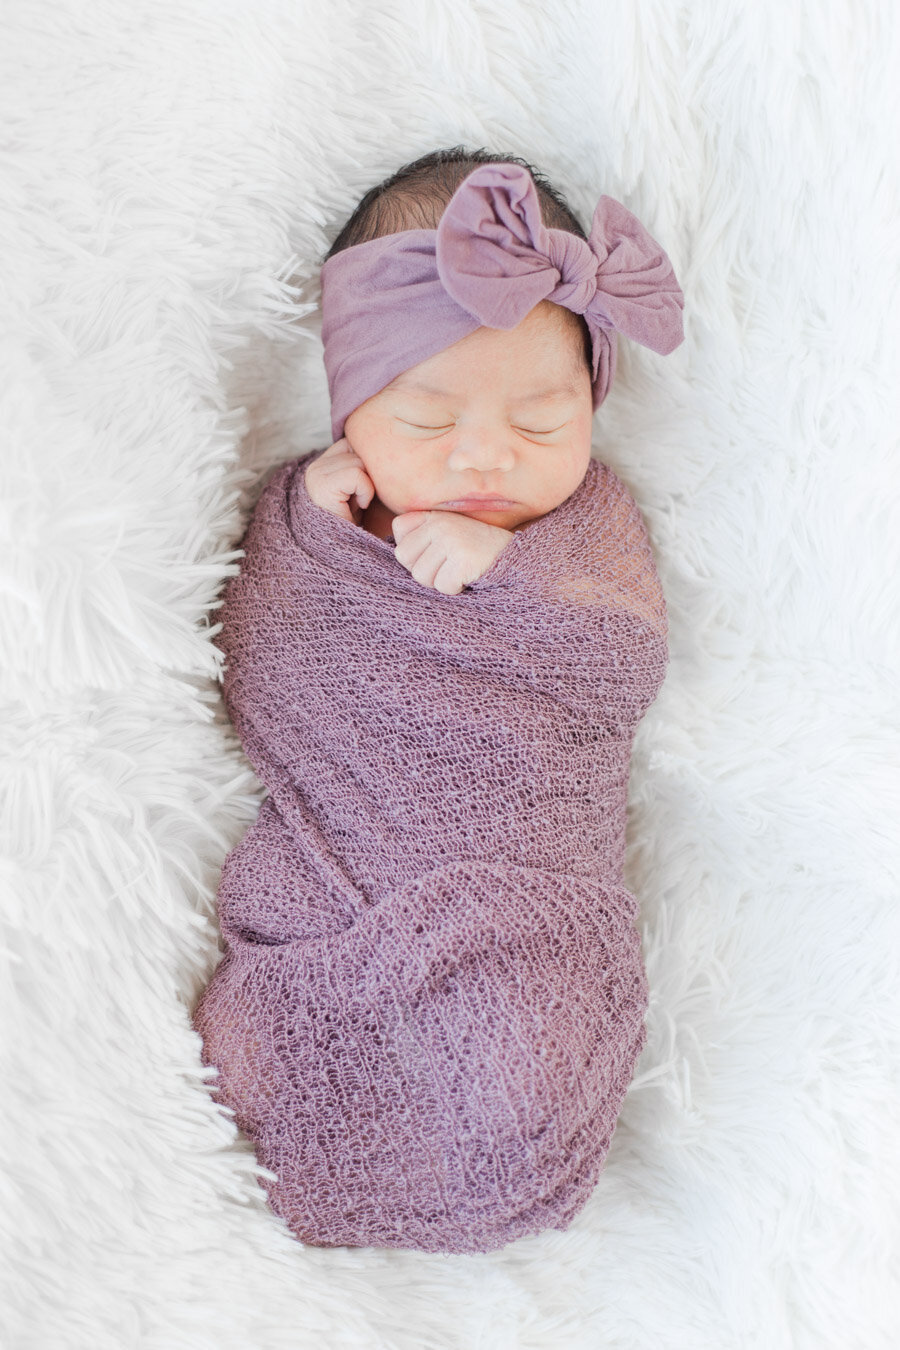 Newborn swaddled in purple and sleeping in Johnstown, CO